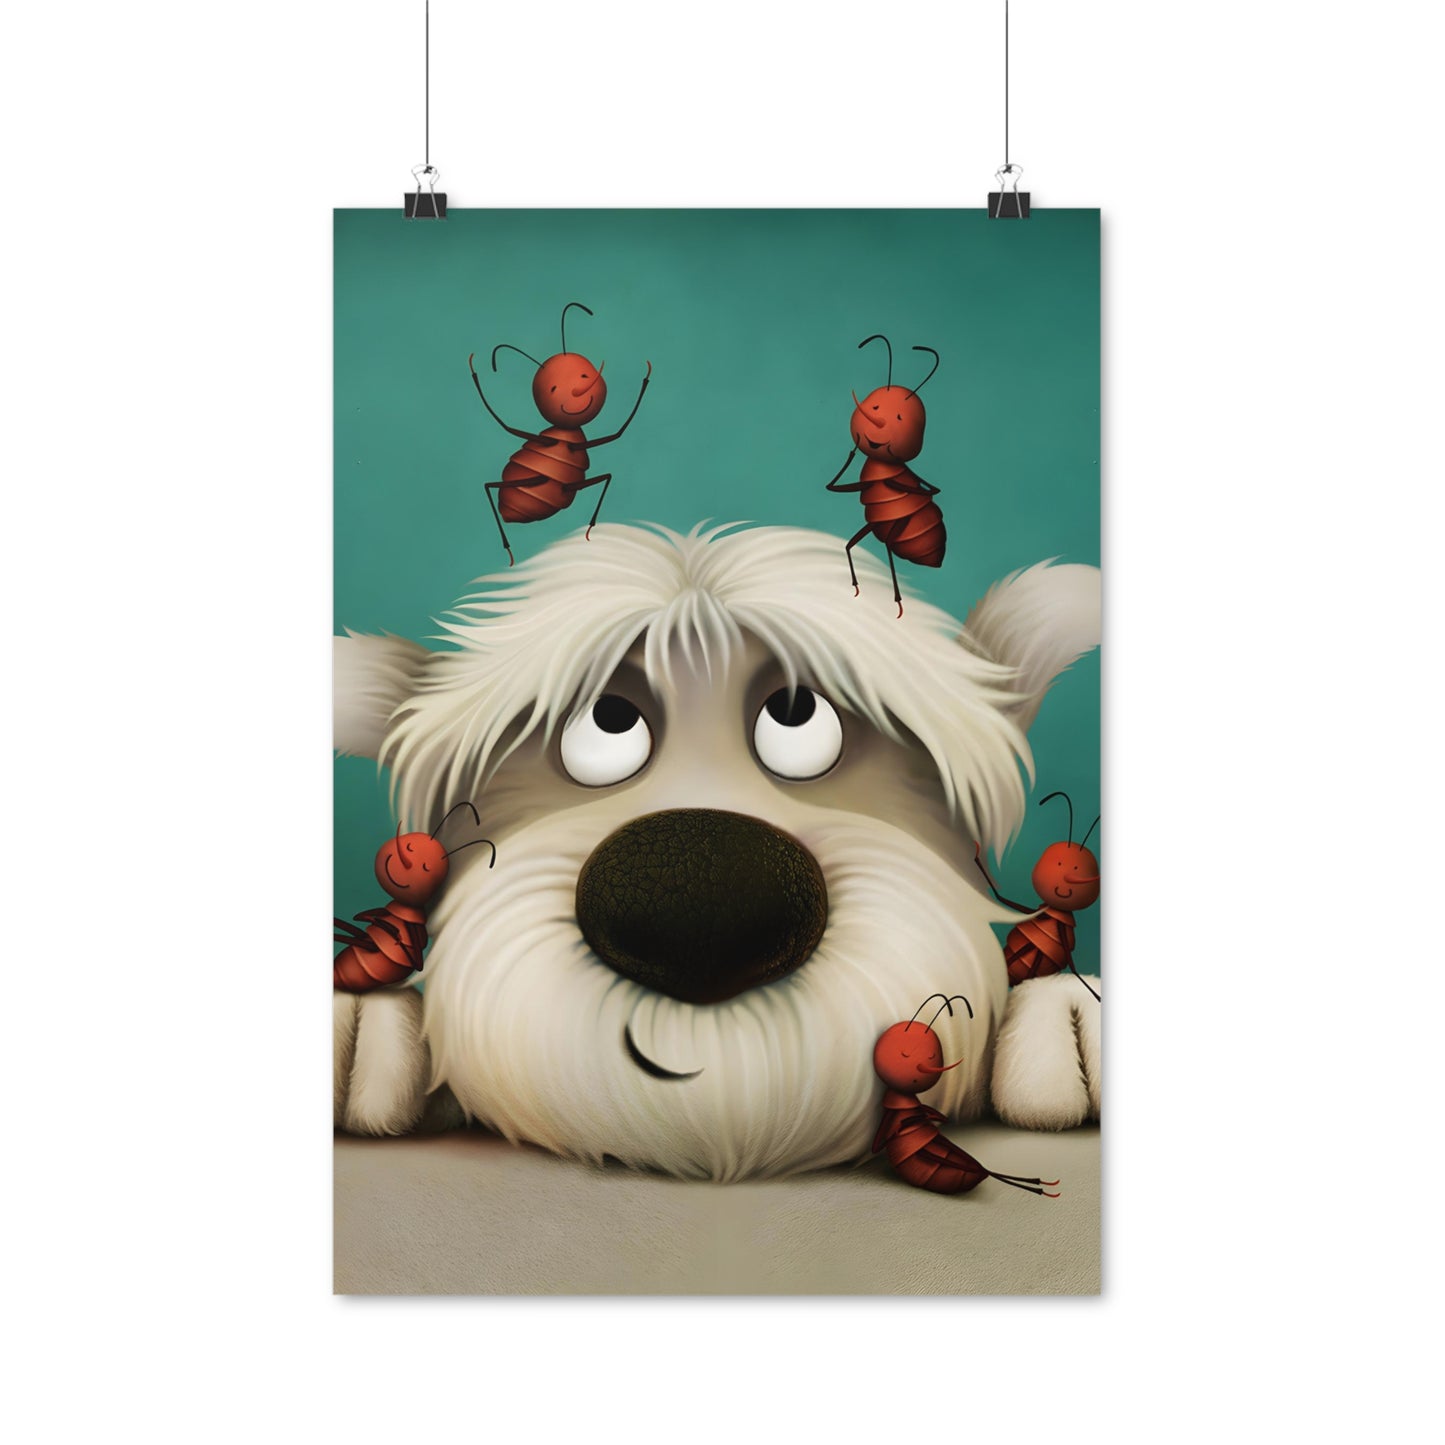 Posters - The dog and ants